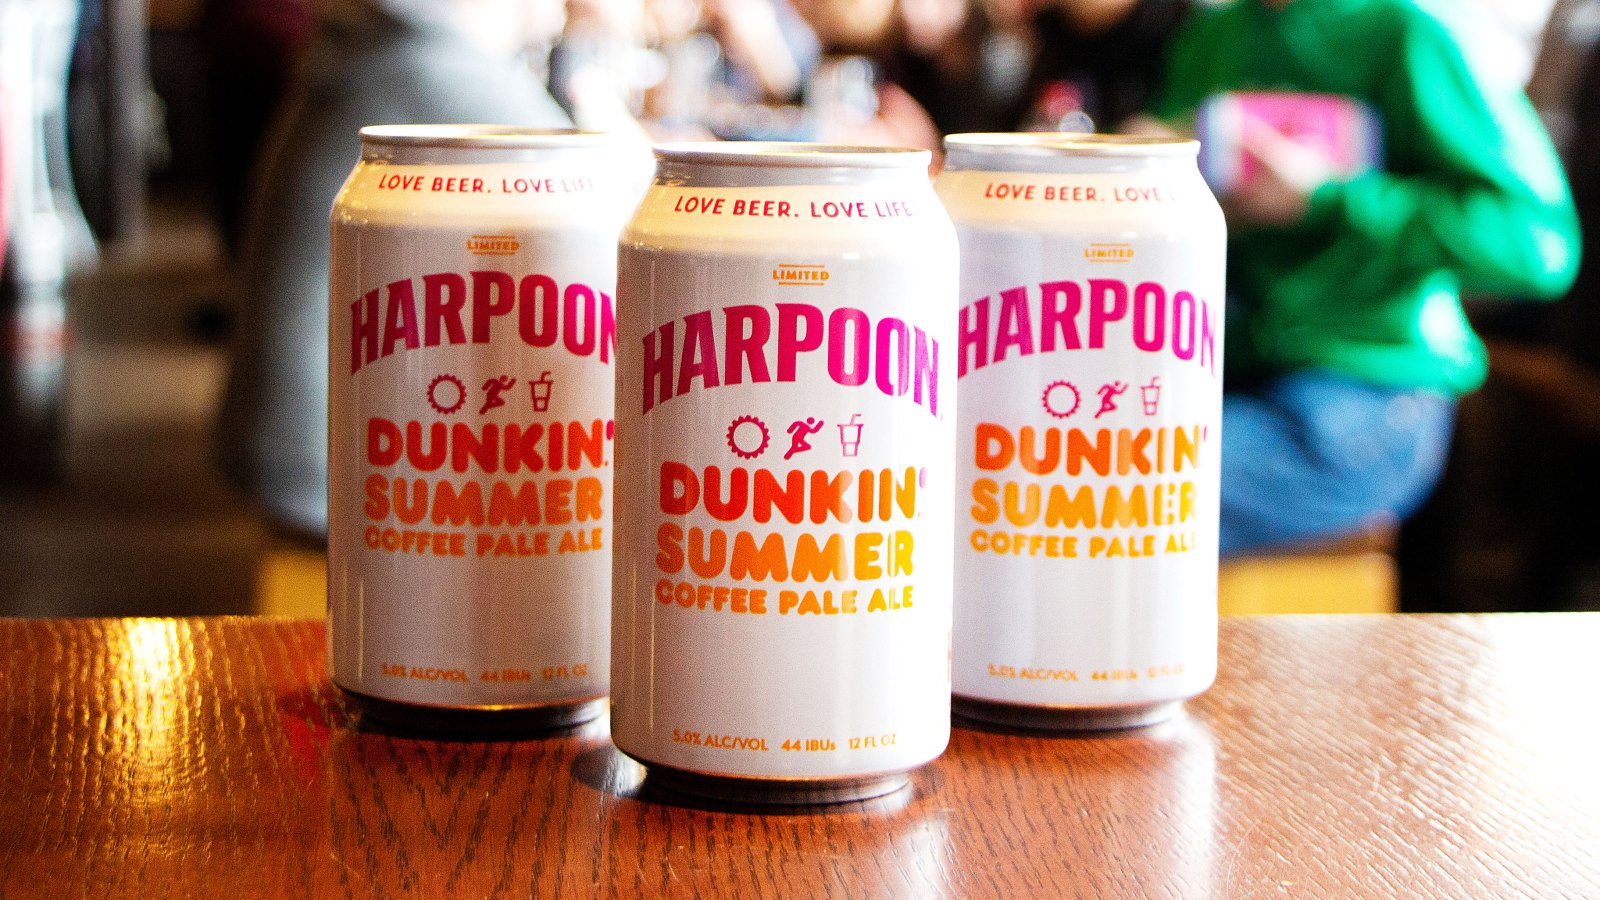 Bottoms Up! Harpoon Brewery, Dunkin’ To Release Summer Coffee Pale Ale